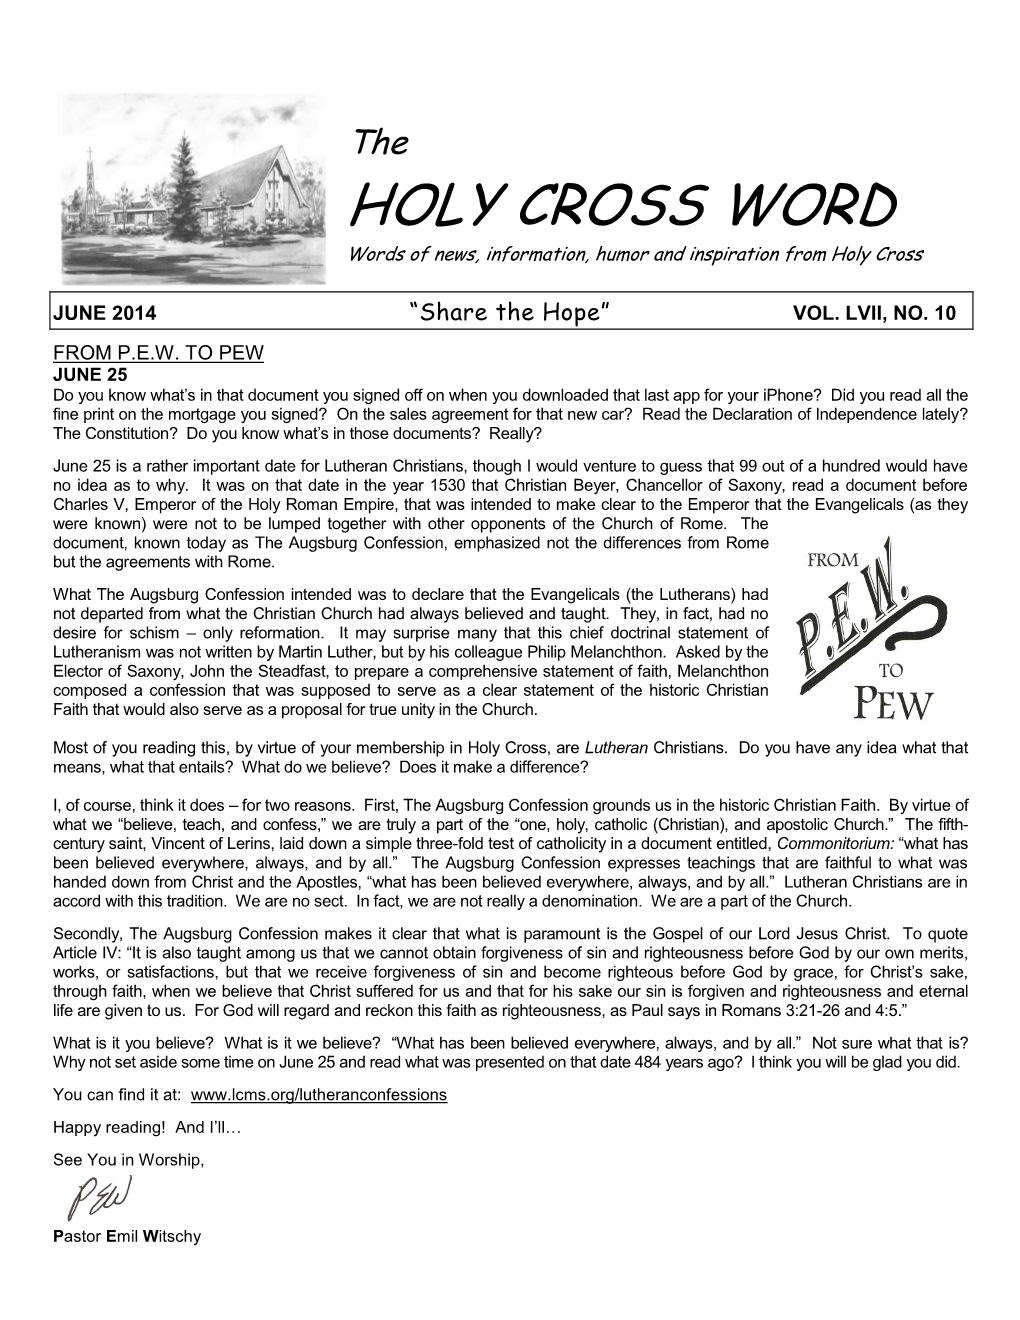 HOLY CROSS WORD Words of News, Information, Humor and Inspiration from Holy Cross